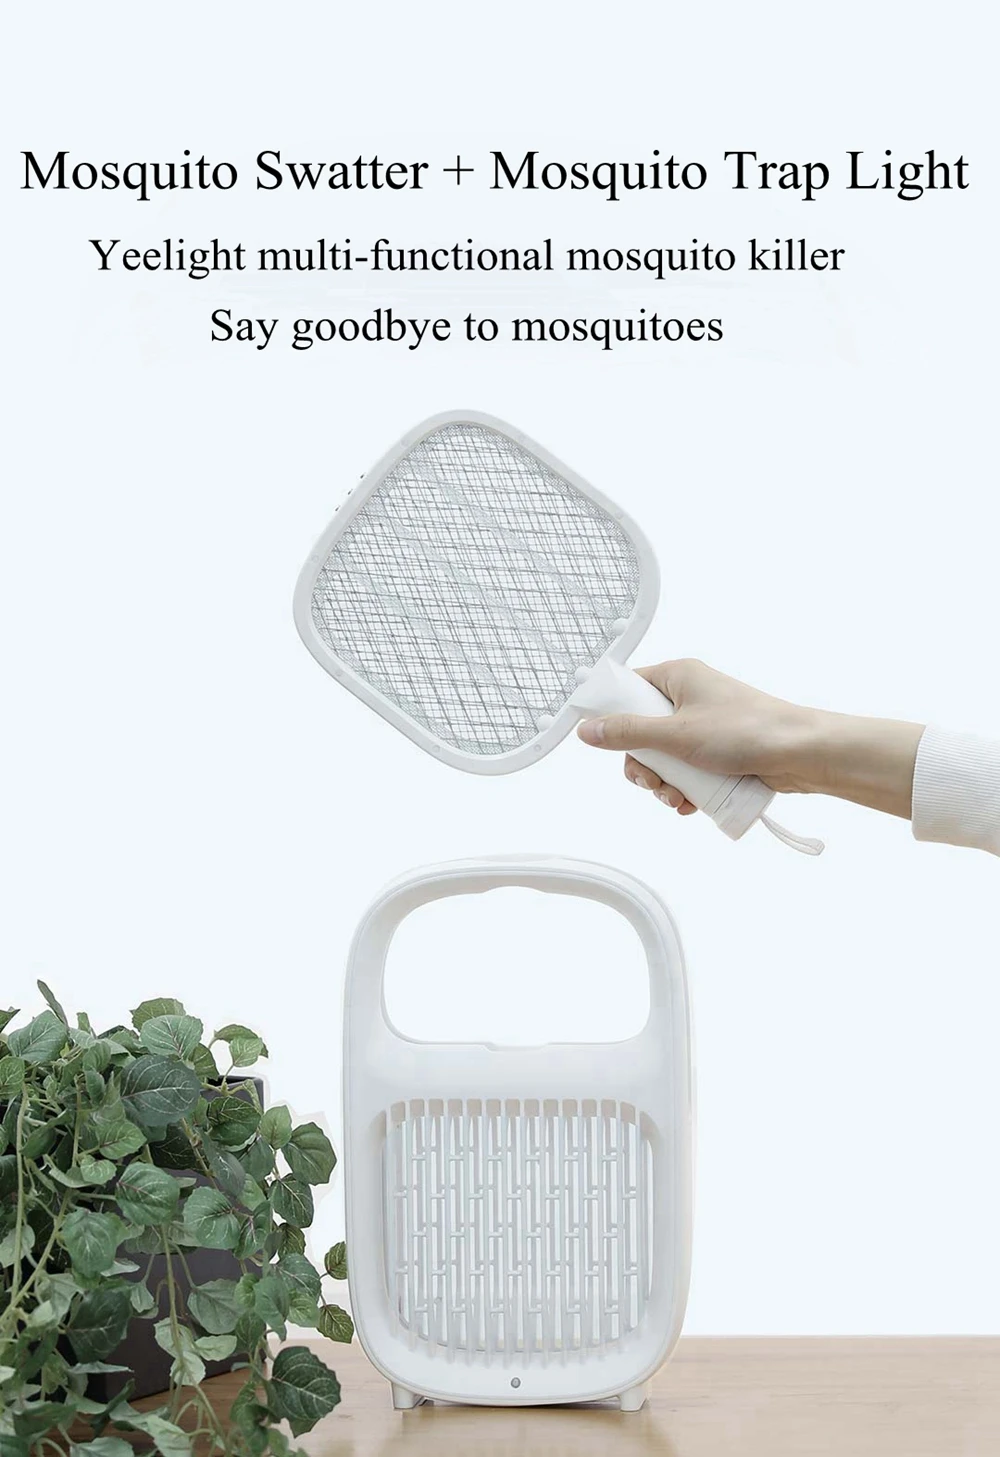 7D704452 46A2 4593 8F49 16A1C02B0373.Jpg &Lt;H1&Gt;Yeelight Usb Rechargeable Mosquito Swatter Led Uv Mosquito Killer Lamp&Lt;/H1&Gt; &Lt;H2&Gt;&Lt;Strong&Gt;Main Feature:&Lt;/Strong&Gt;&Lt;/H2&Gt; &Lt;Ul&Gt; &Lt;Li&Gt;Electric Mosquito Swatter: Built-In Rechargeable 18650 Battery, Short Charging Time, Long Use Time&Lt;/Li&Gt; &Lt;Li&Gt;360-400Nm Uv Trap Lamp: Comes With A Light-Controlled Sensor,  Easy To Kill Mosquitoes In Dark Environments&Lt;/Li&Gt; &Lt;Li&Gt;Safe To Use: Physical Mosquito Killing, No Chemicals, No Radiation, And Entirely Non-Toxic. Health And Environmental Protection&Lt;/Li&Gt; &Lt;Li&Gt;Portable To Carry: This Mosquito Zapper Comes In A Practical Design, With The Small Dimensions Allowing You To Carry It Anywhere You Need It!&Lt;/Li&Gt; &Lt;/Ul&Gt; Yeelight Usb Rechargeable Mosquito Yeelight Usb Rechargeable Mosquito Swatter Led Uv Mosquito Killer Lamp